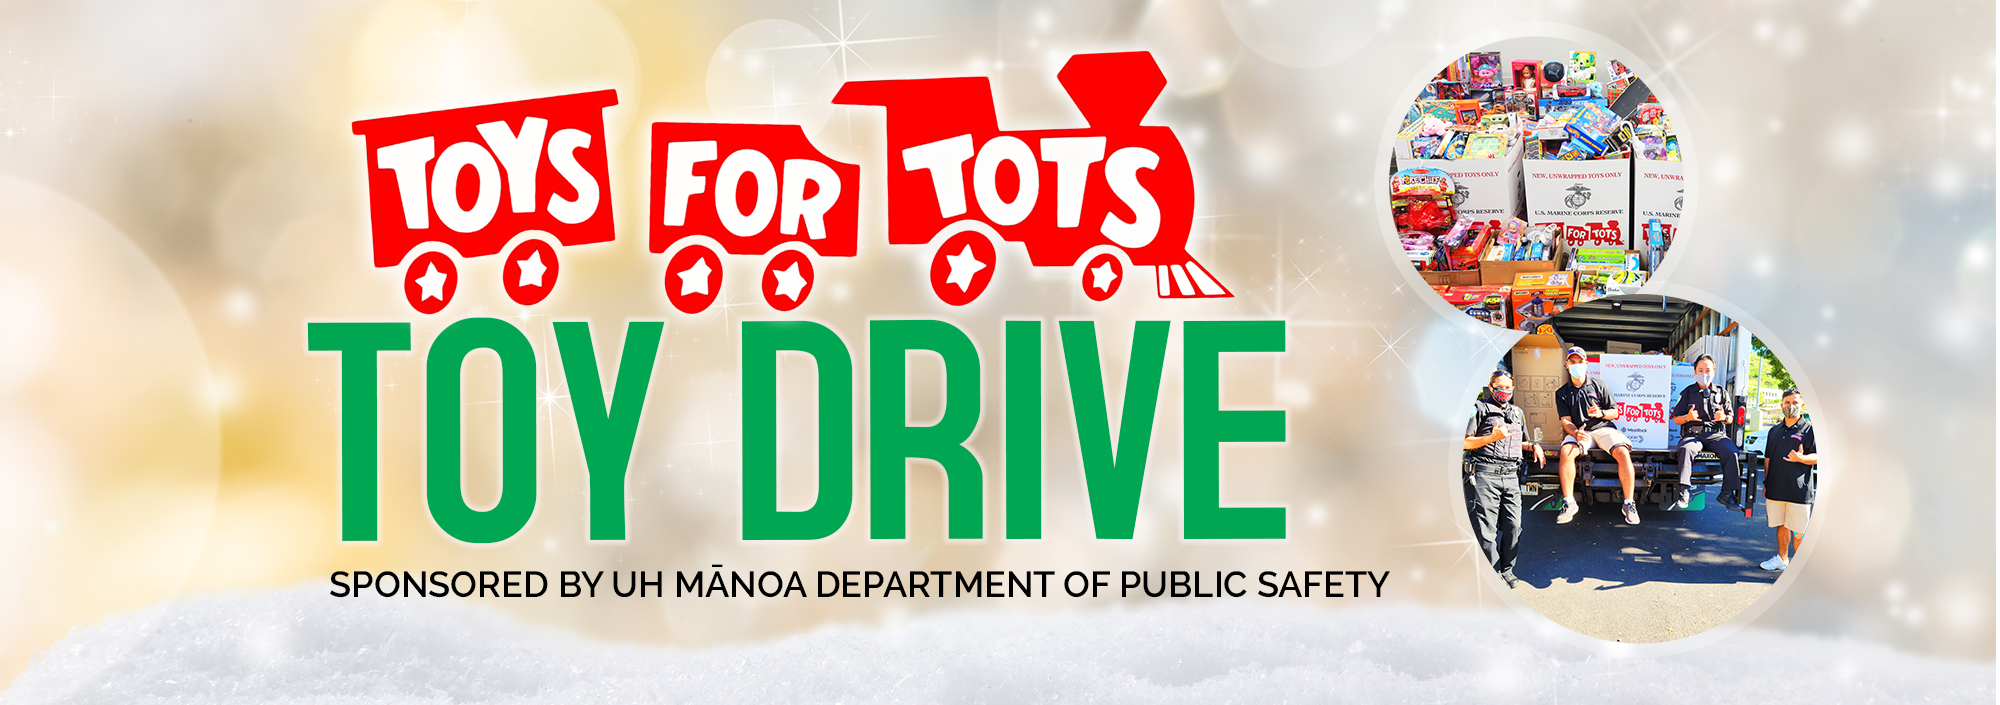 Winter background with Toys for Tots Toy Drive, Sponsored by UH Manoa Department of Public Safety